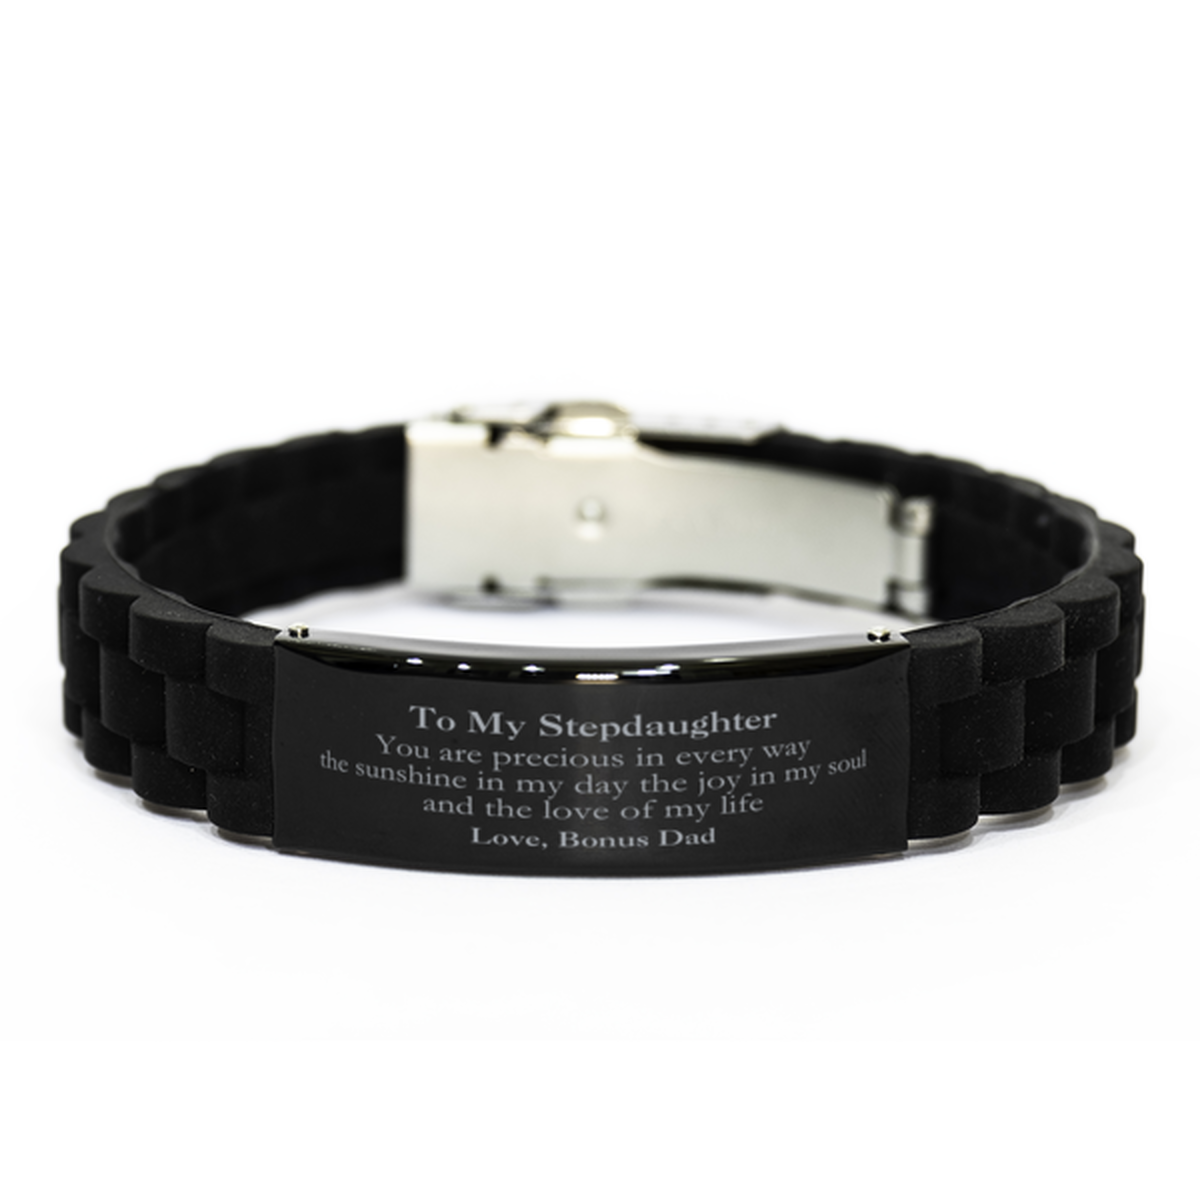 Graduation Gifts for Stepdaughter Black Glidelock Clasp Bracelet Present from Bonus Dad, Christmas Stepdaughter Birthday Gifts Stepdaughter You are precious in every way the sunshine in my day. Love, Bonus Dad